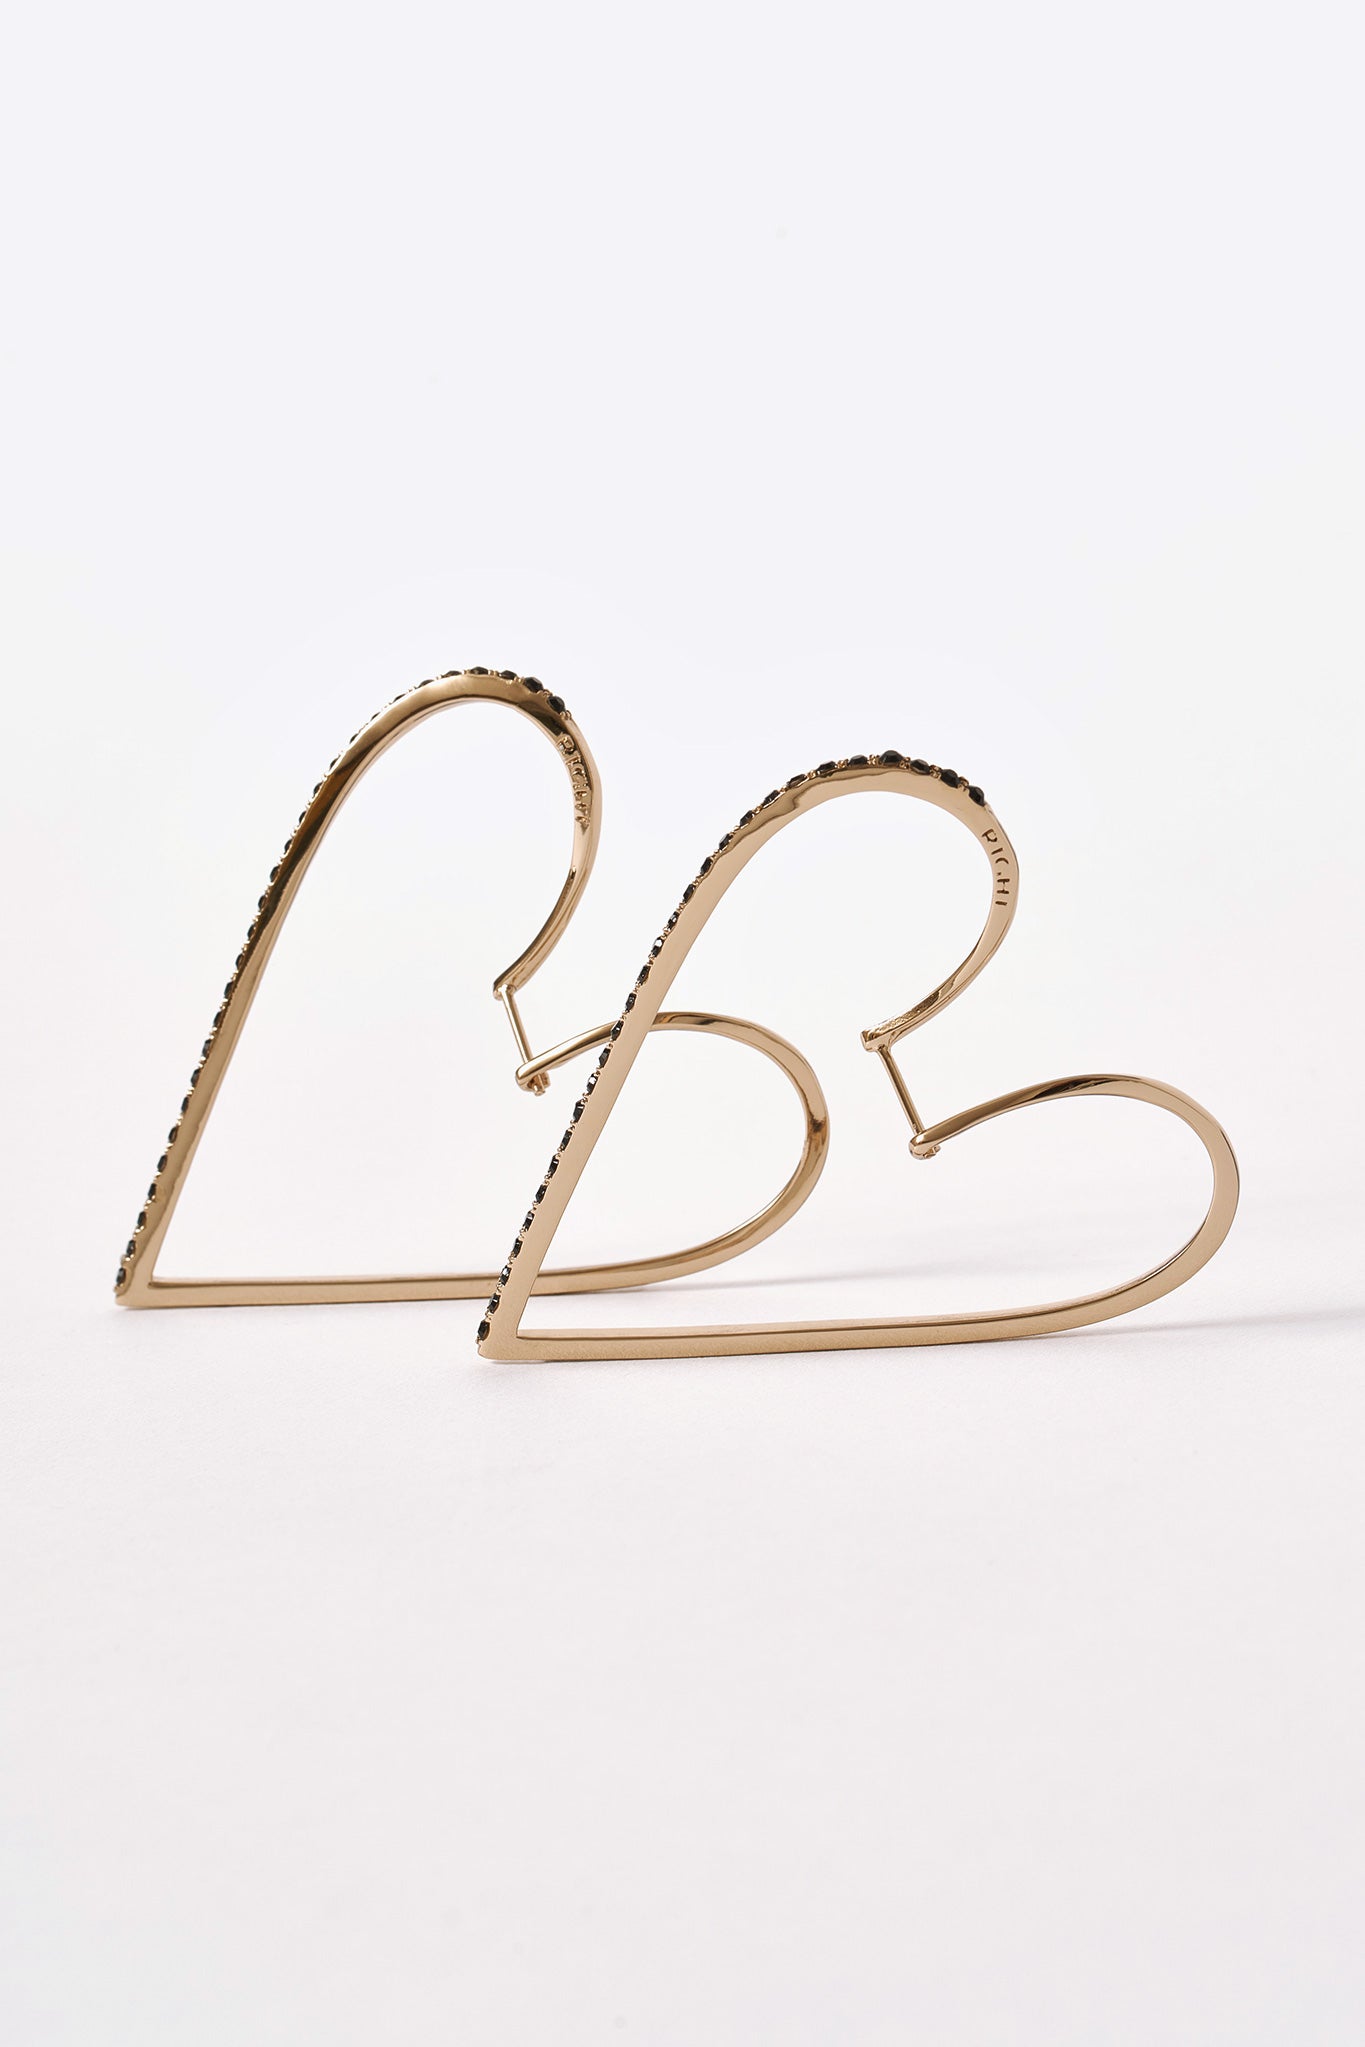 THE HEARTBEAT HOOPS PAIR